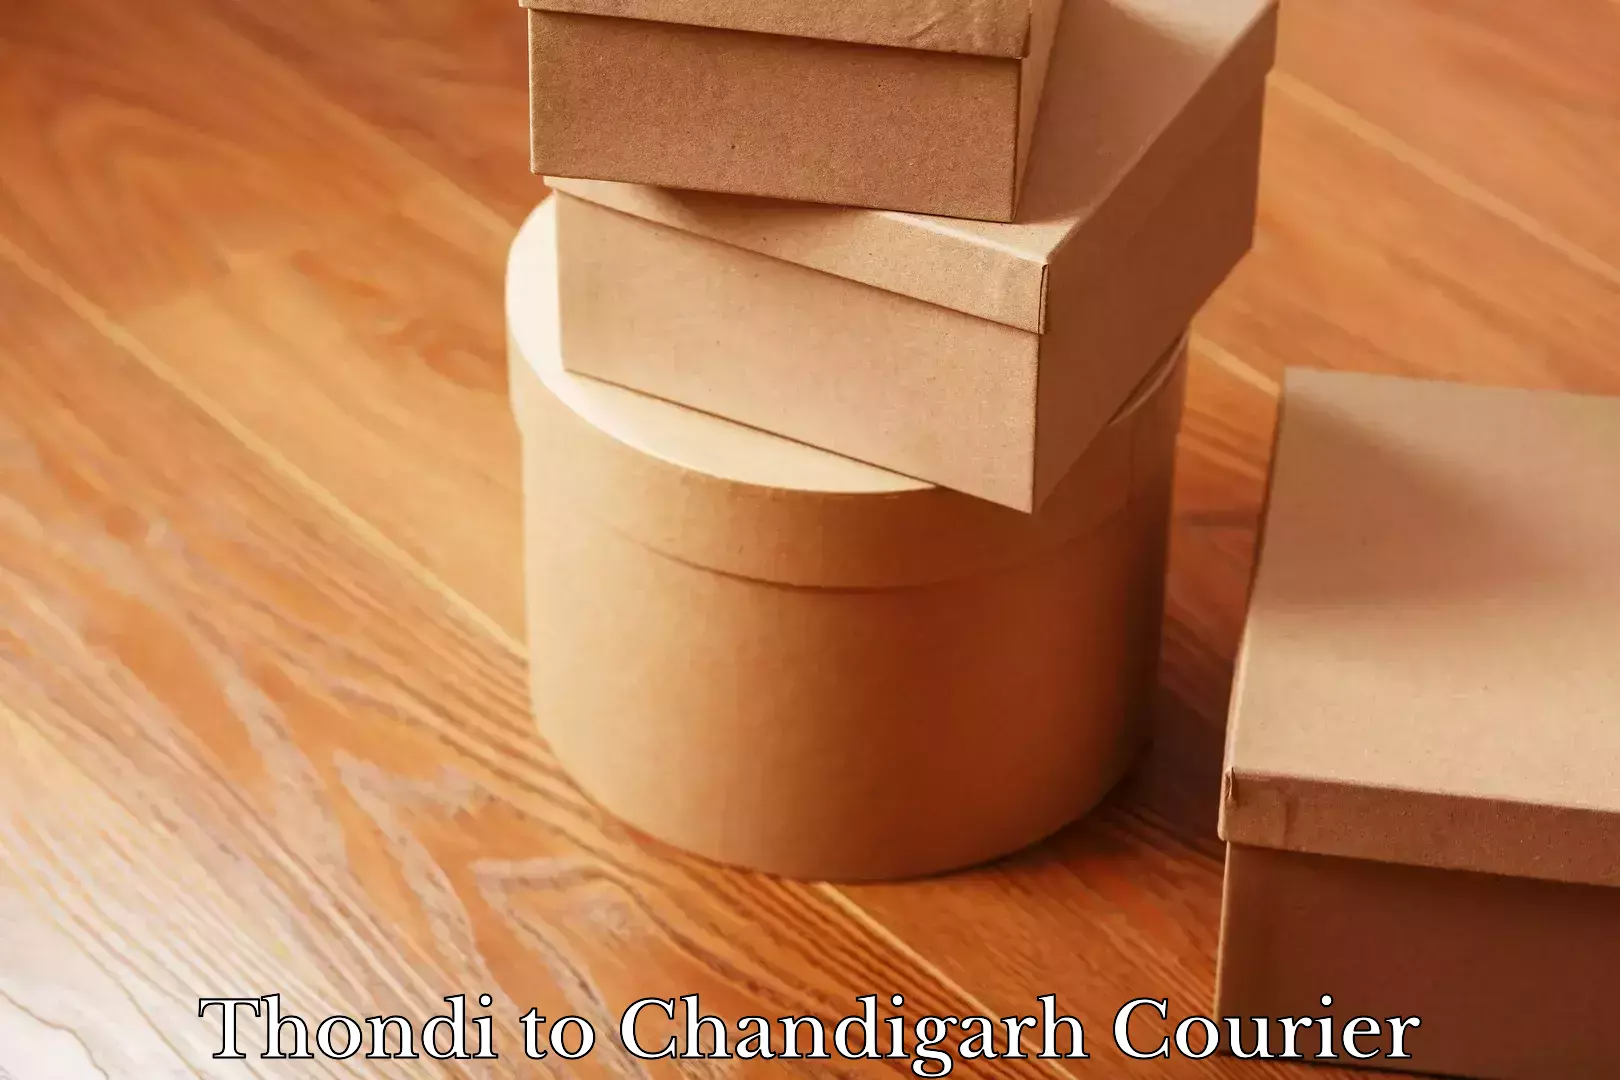 Reliable courier service Thondi to Chandigarh